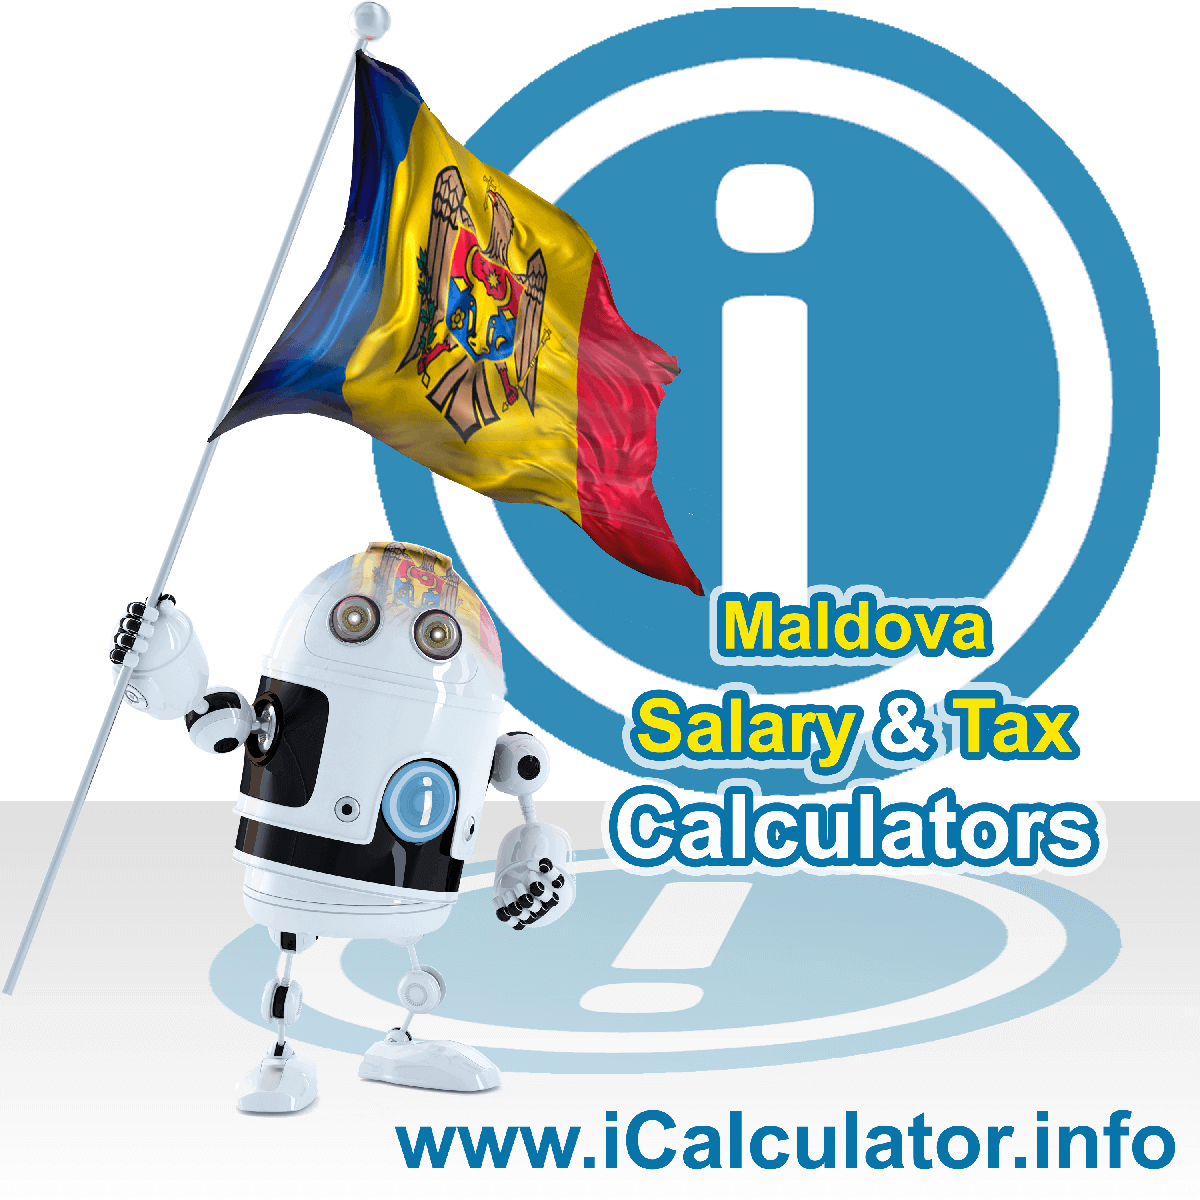 Moldova Wage Calculator. This image shows the Moldova flag and information relating to the tax formula for the Moldova Tax Calculator